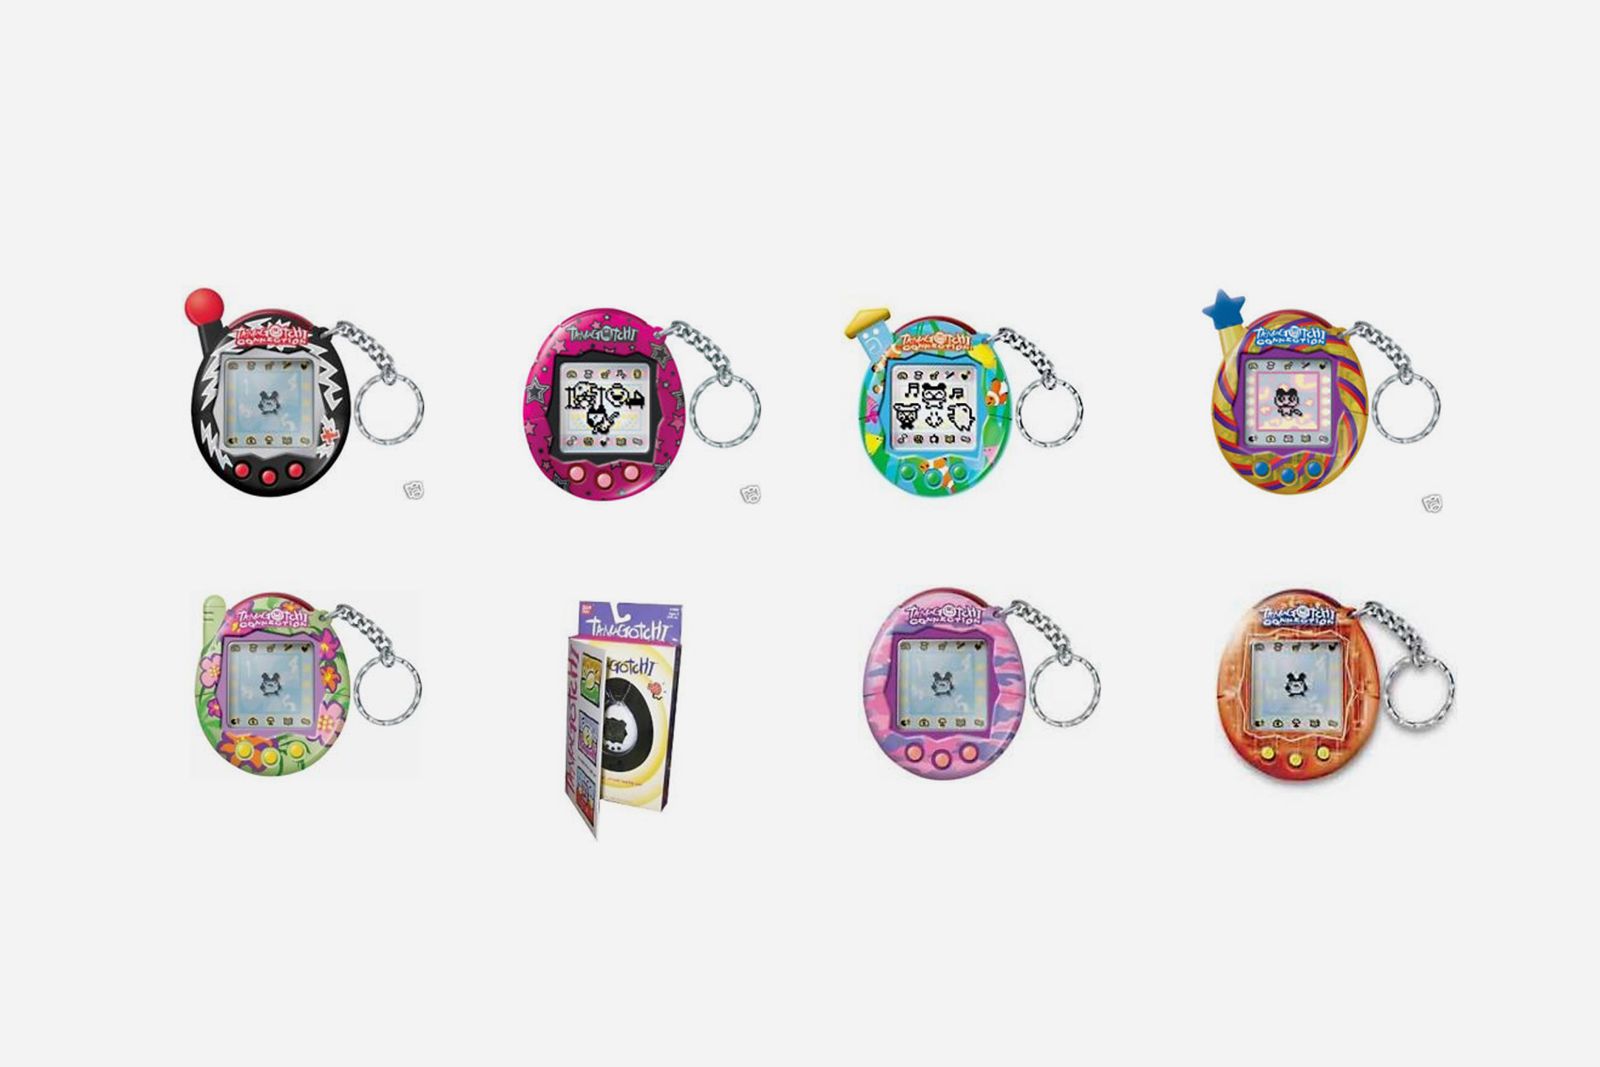 What is Tamagotchi and why its coming back image 2